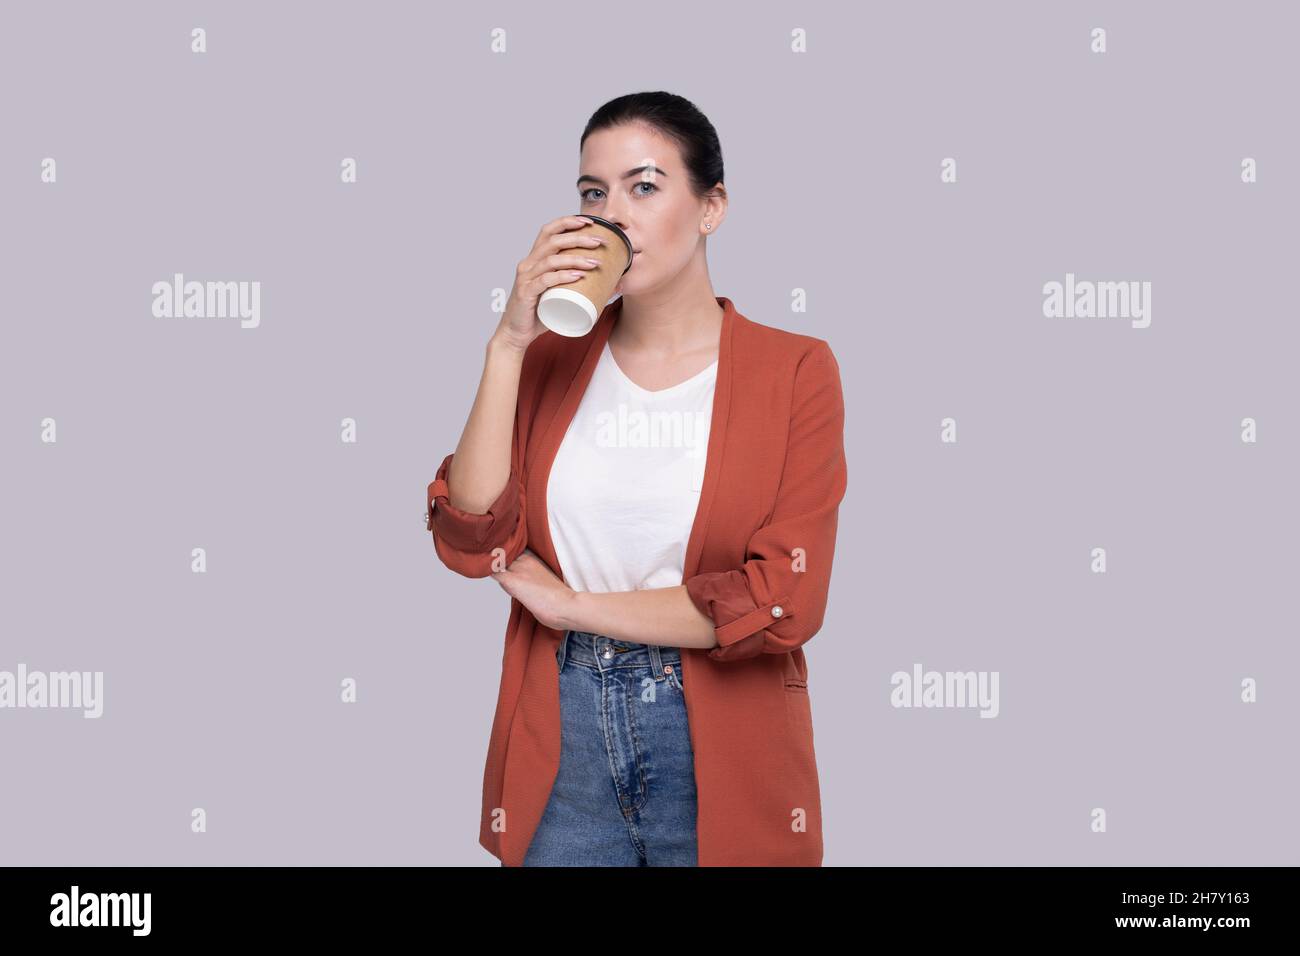 Girl Drinking Coffee from Take Away Cup. Girl With To Go Coffee Cup in Hands. Stock Photo